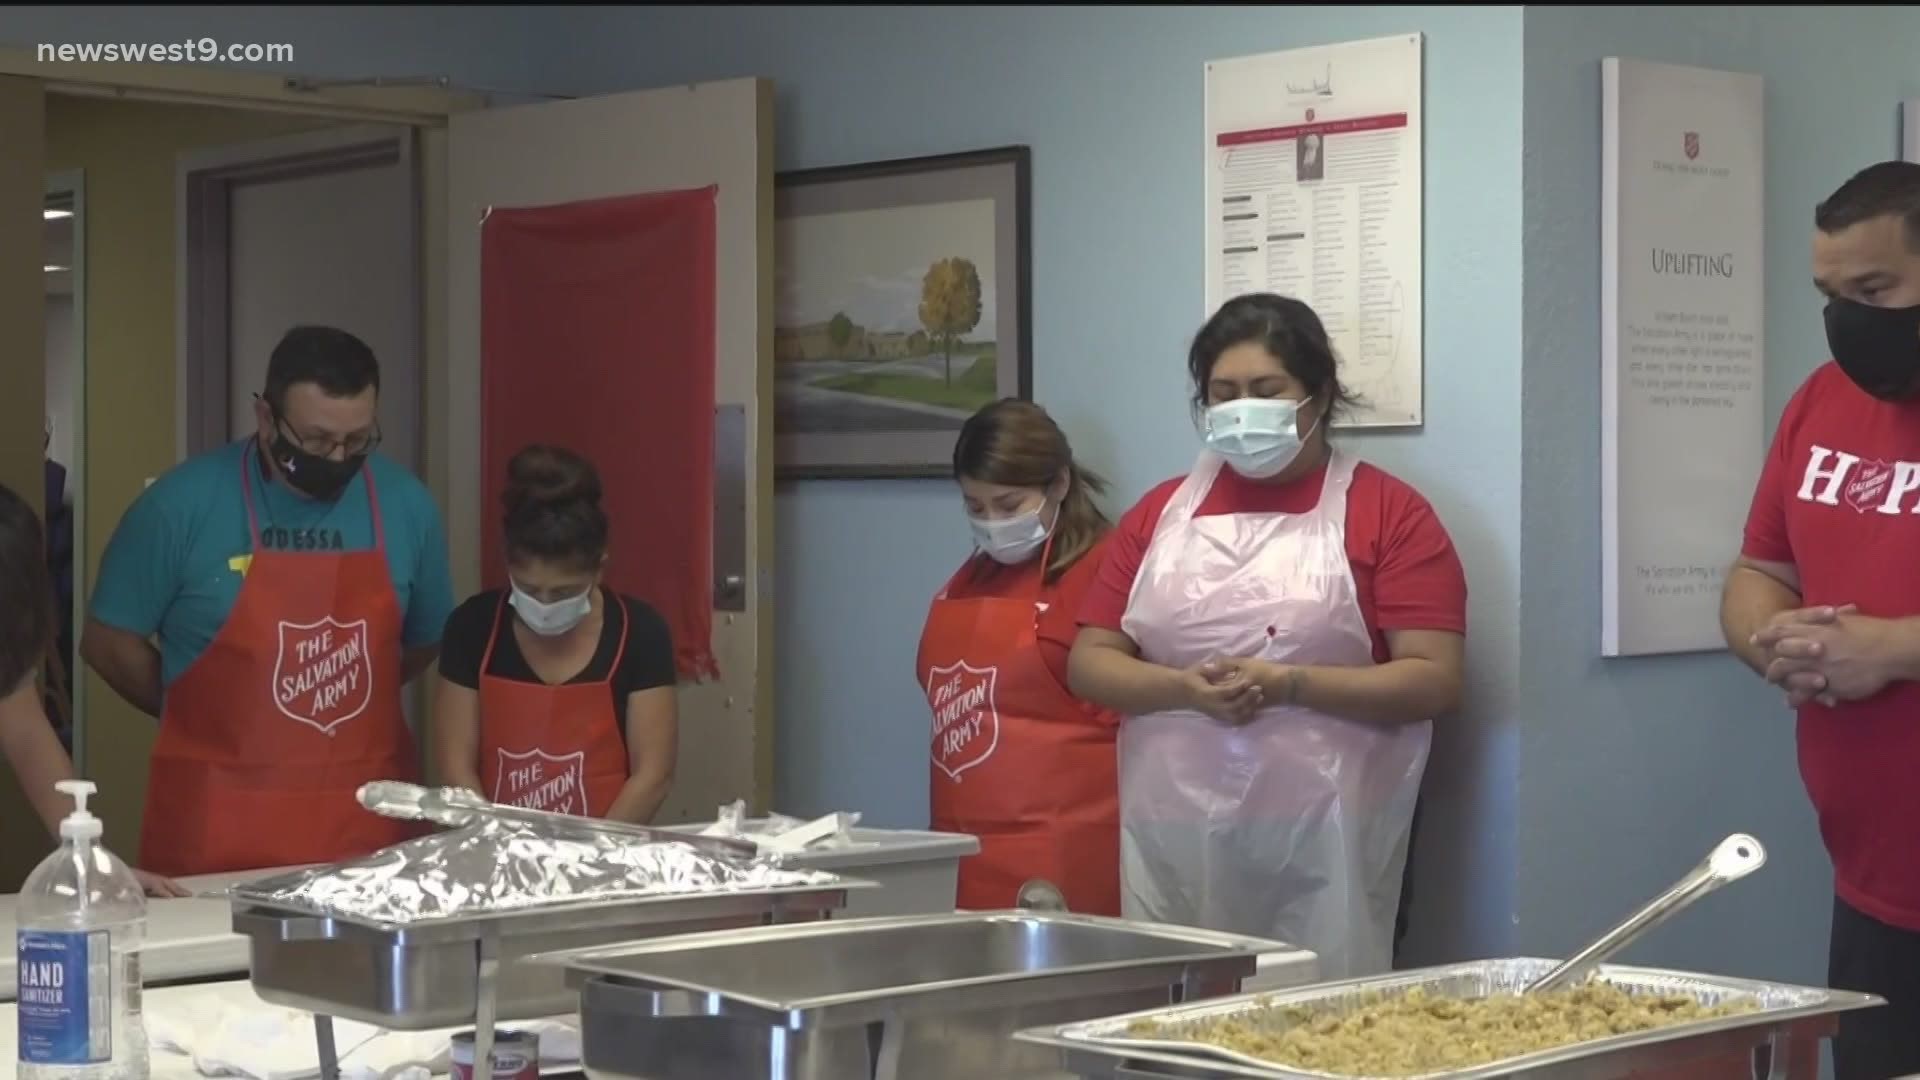 The Salvation Army provided lunches on Thanksgiving for families.